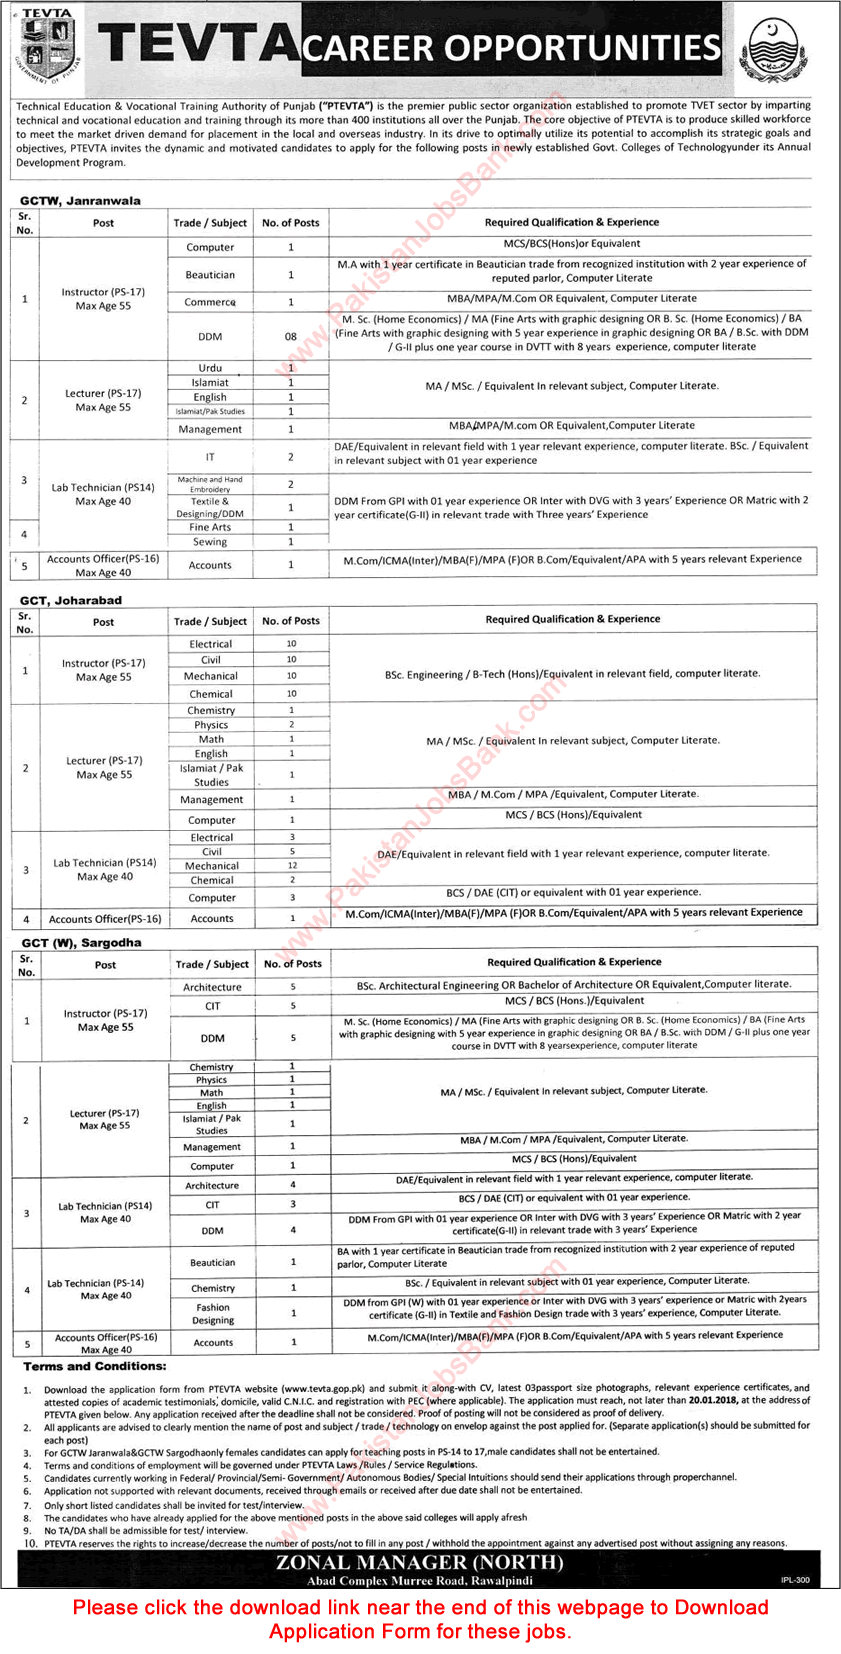 TEVTA Jobs 2018 January Application Form Instructors, Lecturers, Lab Technicians & Others Latest